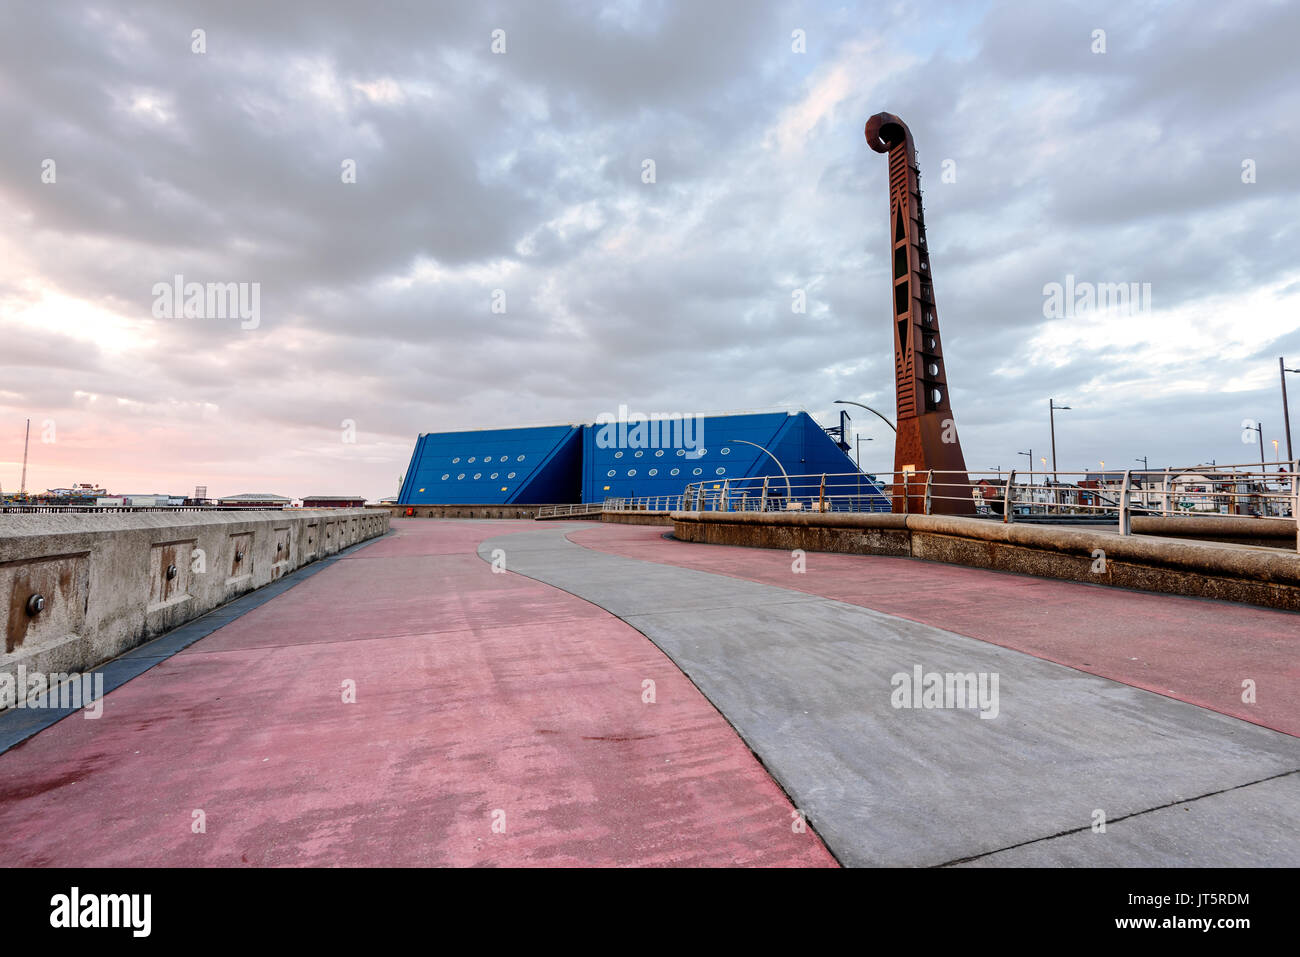 Serpent shape building on the south bank of Blackpool, England Stock Photo